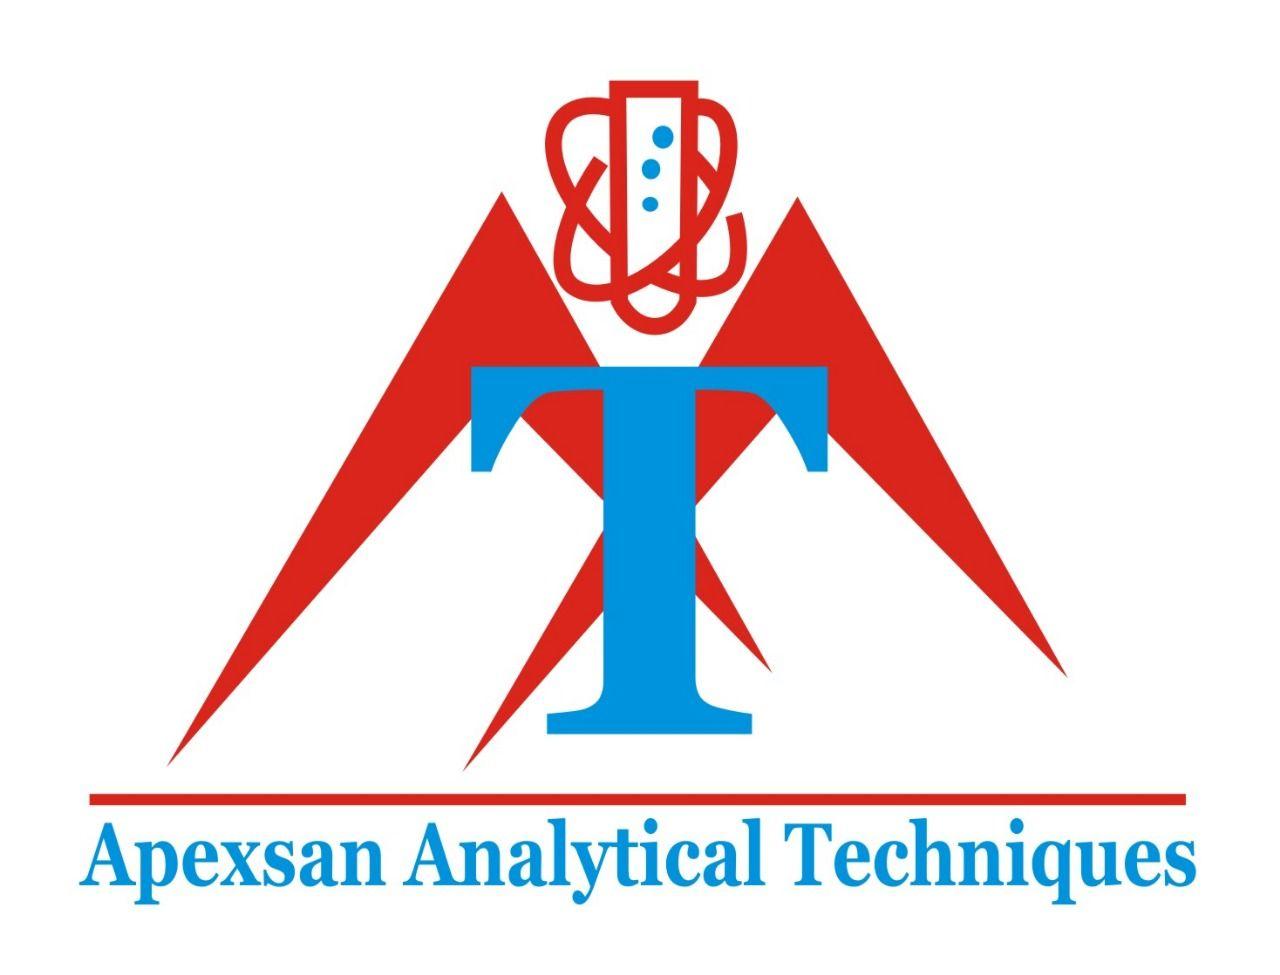 APEXSAN ANALYTICAL TECHNIQUES